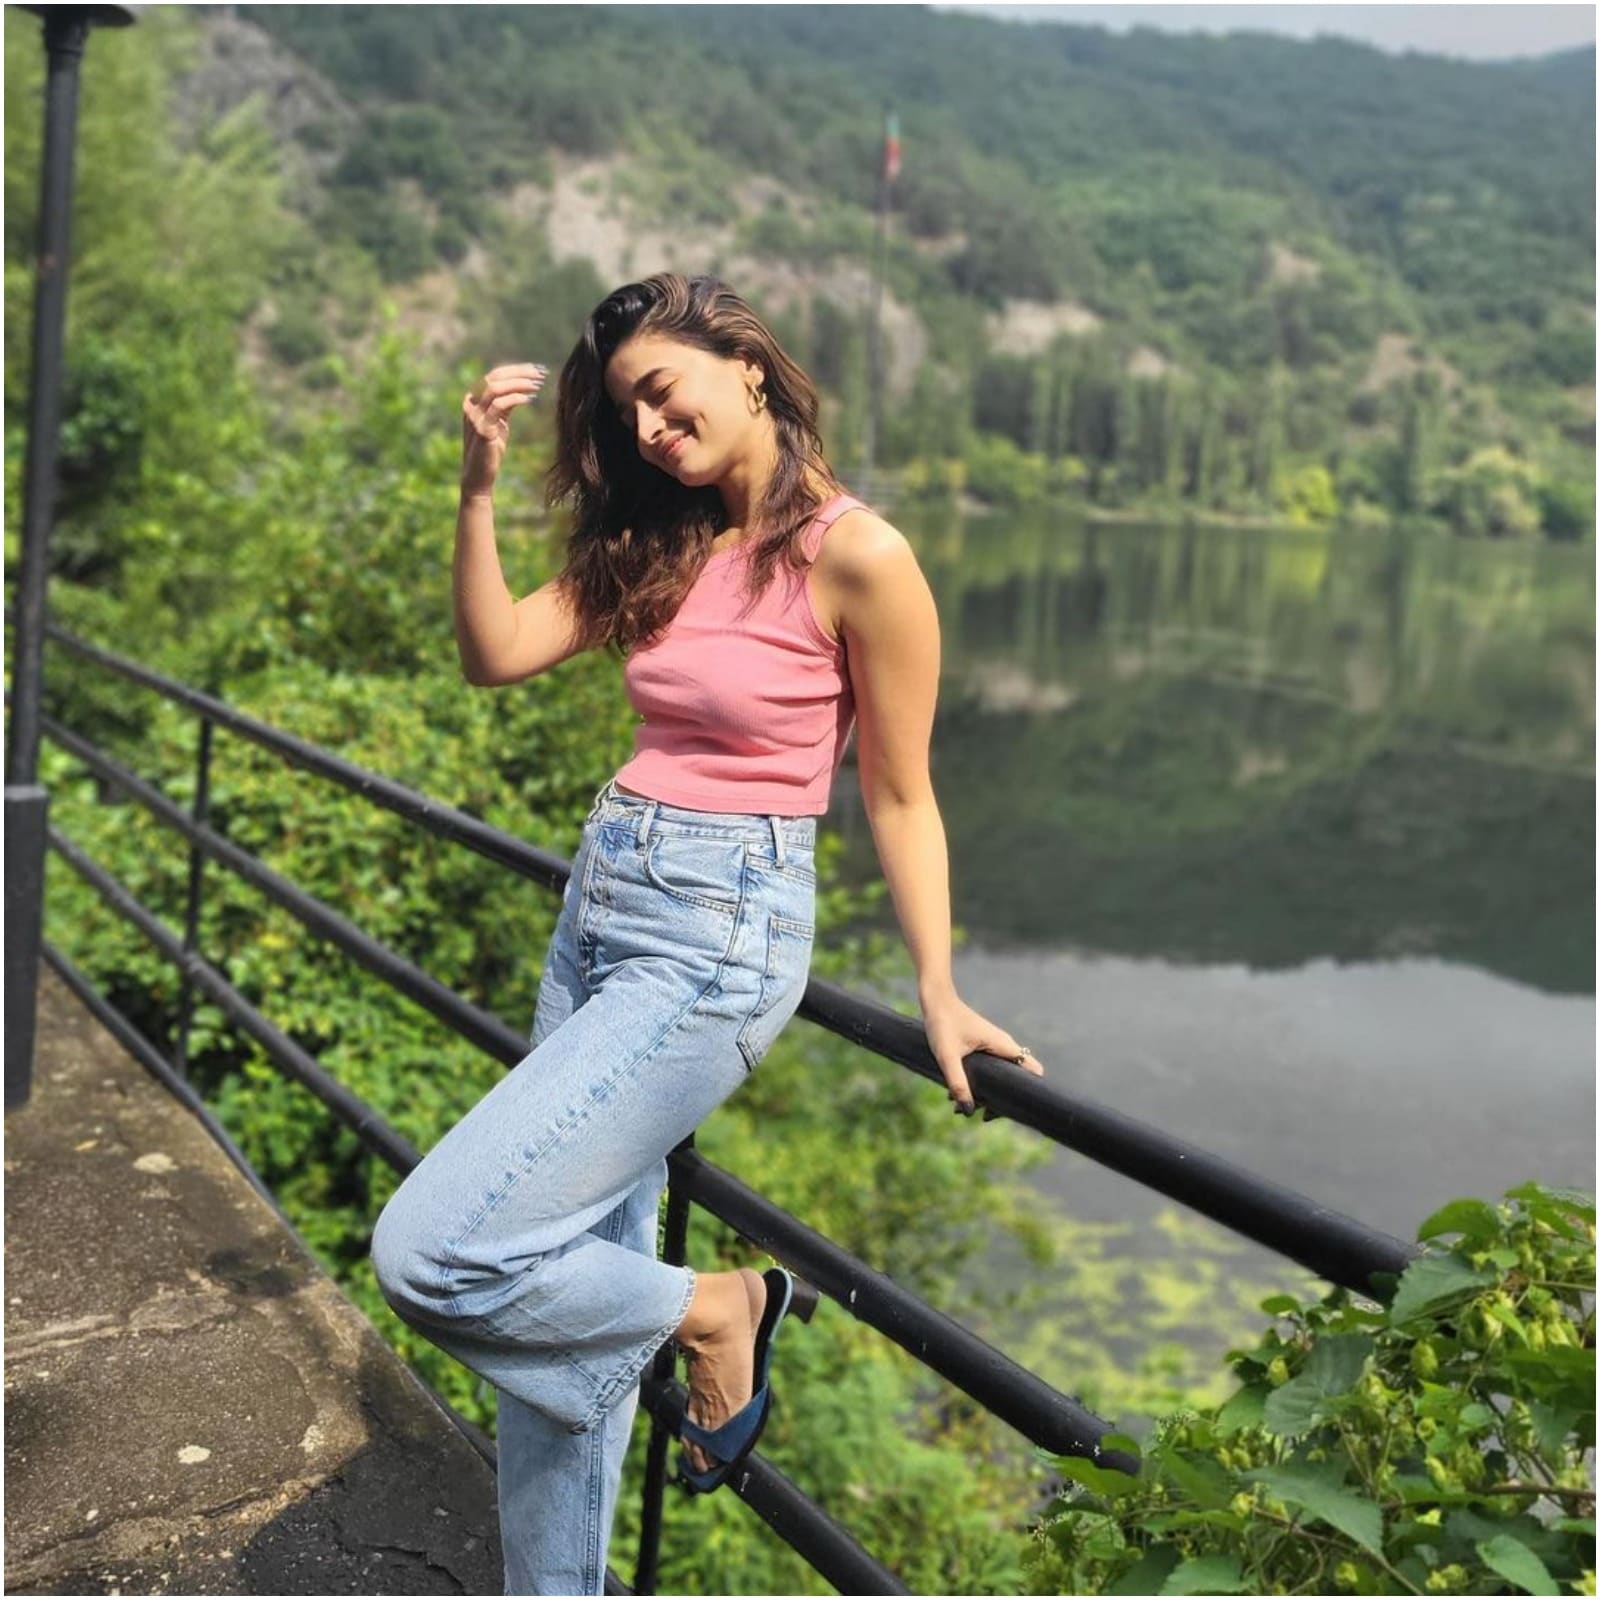 Alia Bhatt's latest outing makes denin-on-denim look good; how to ace the  combination